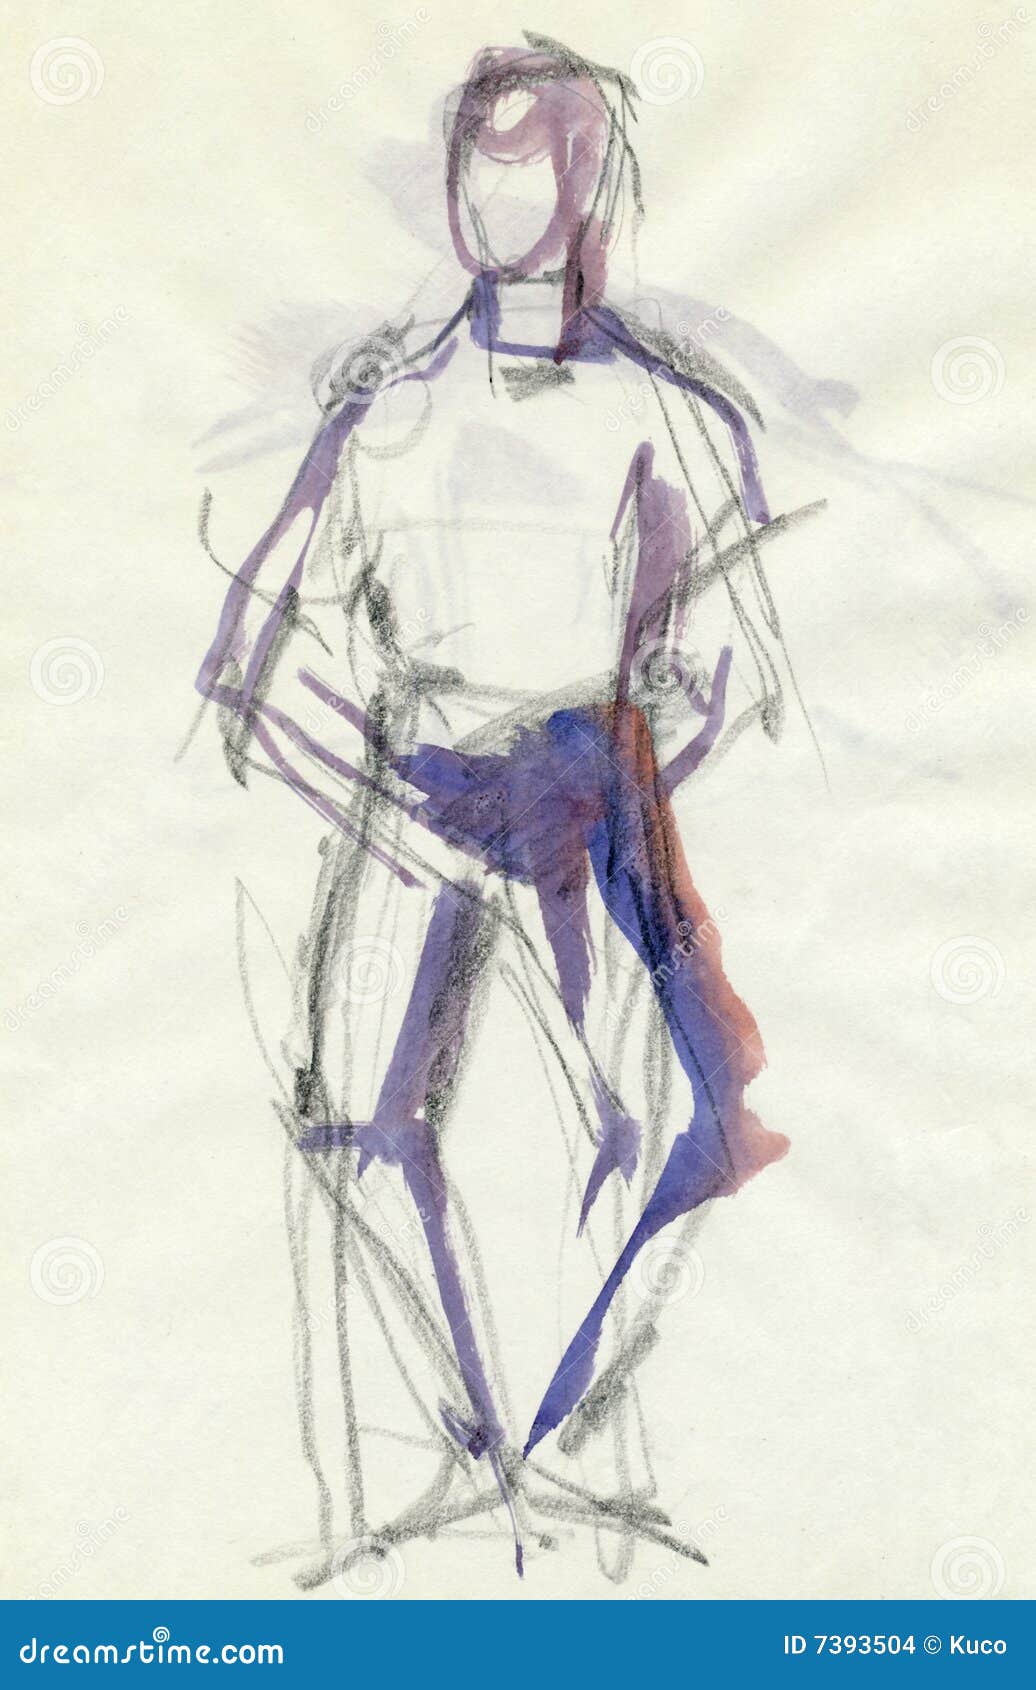 Standing Man, Drawing Stock Images - Image: 7393504